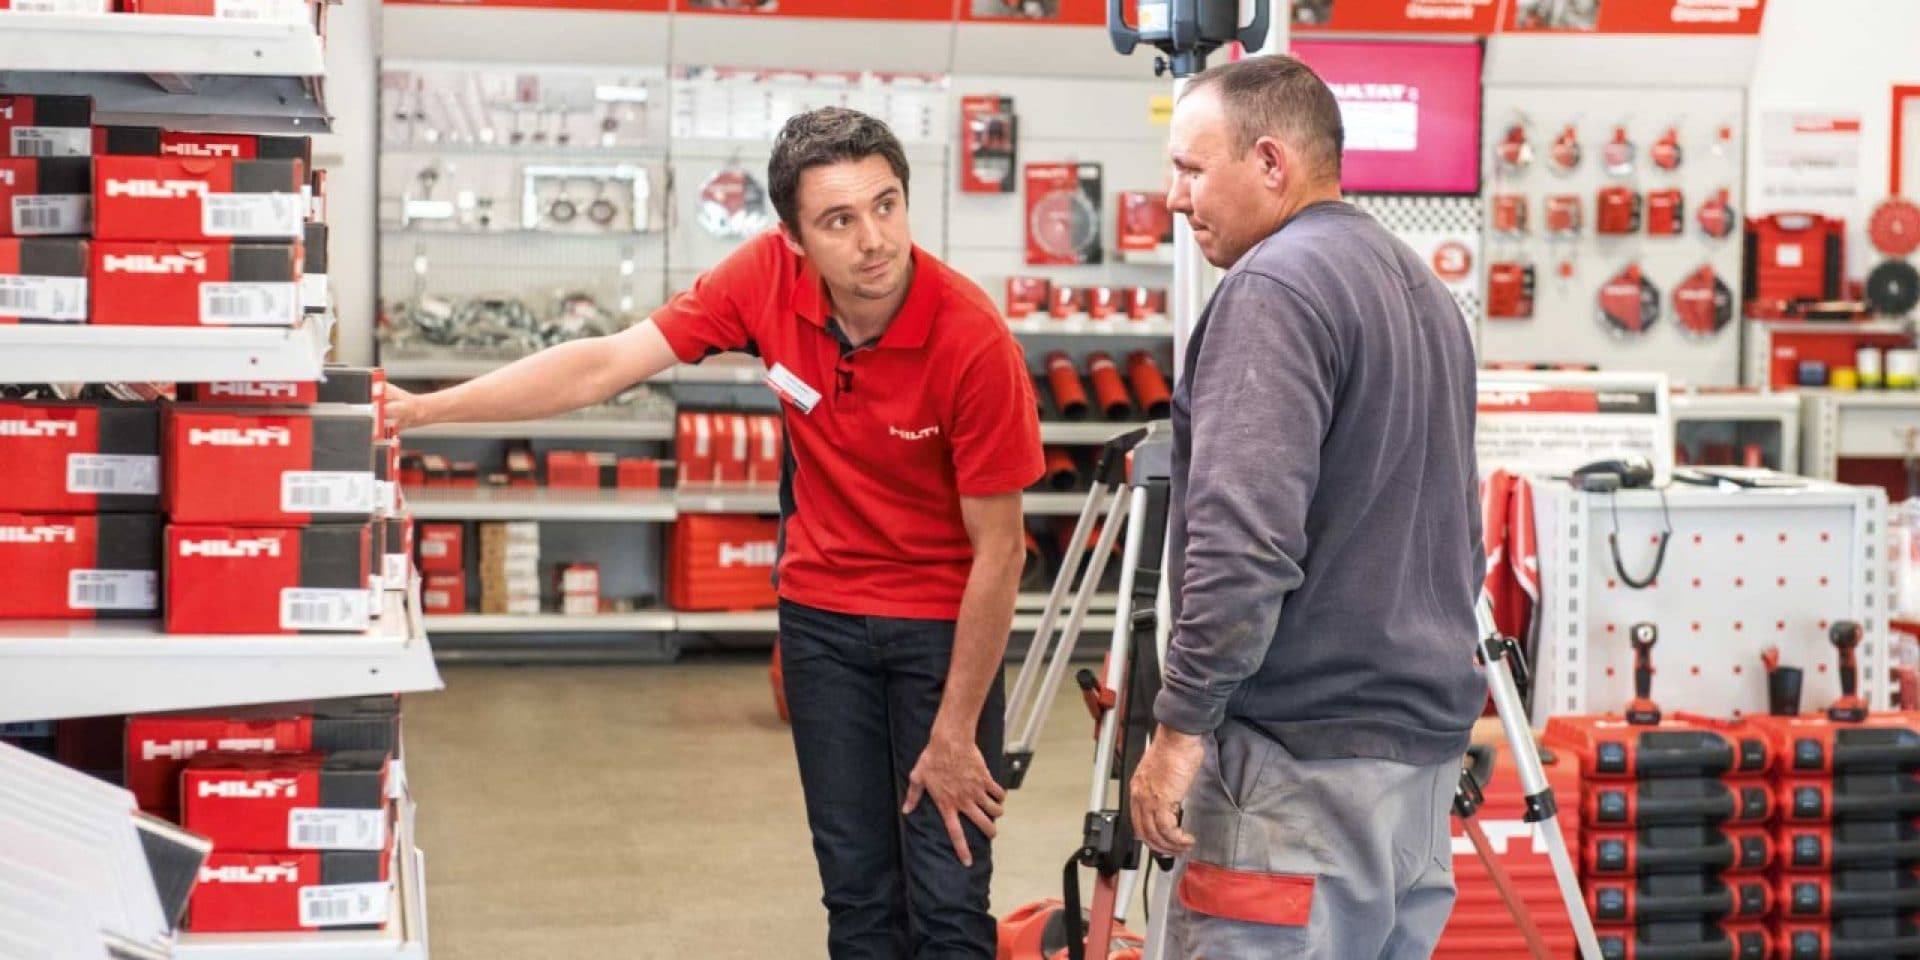 Hilti representative helping a customer find what they need at a Hilti store.